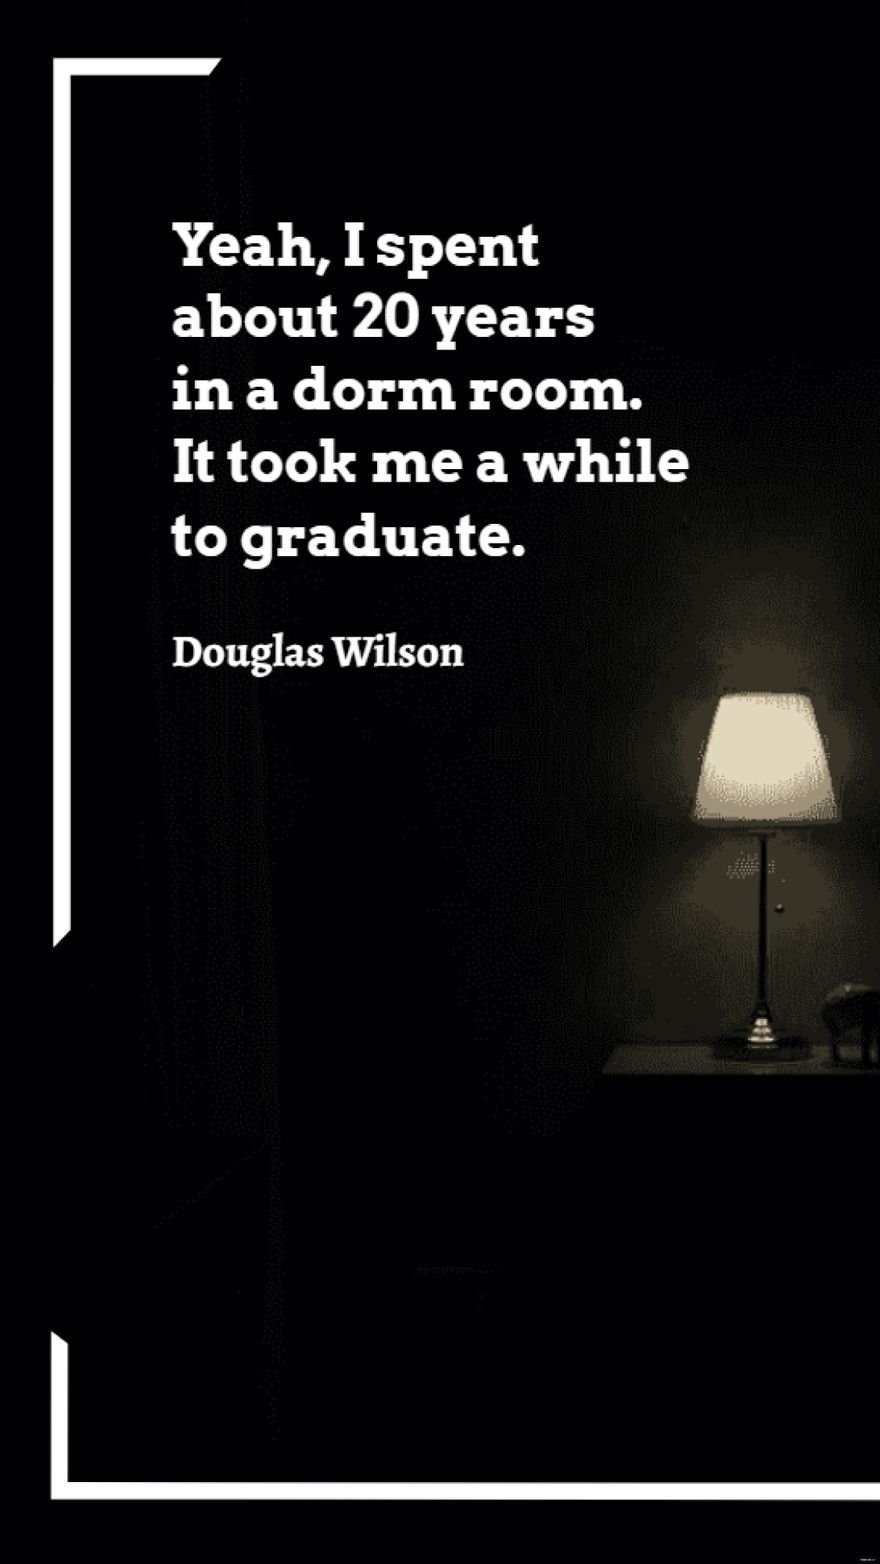 Douglas Wilson - Yeah, I spent about 20 years in a dorm room. It took me a while to graduate.